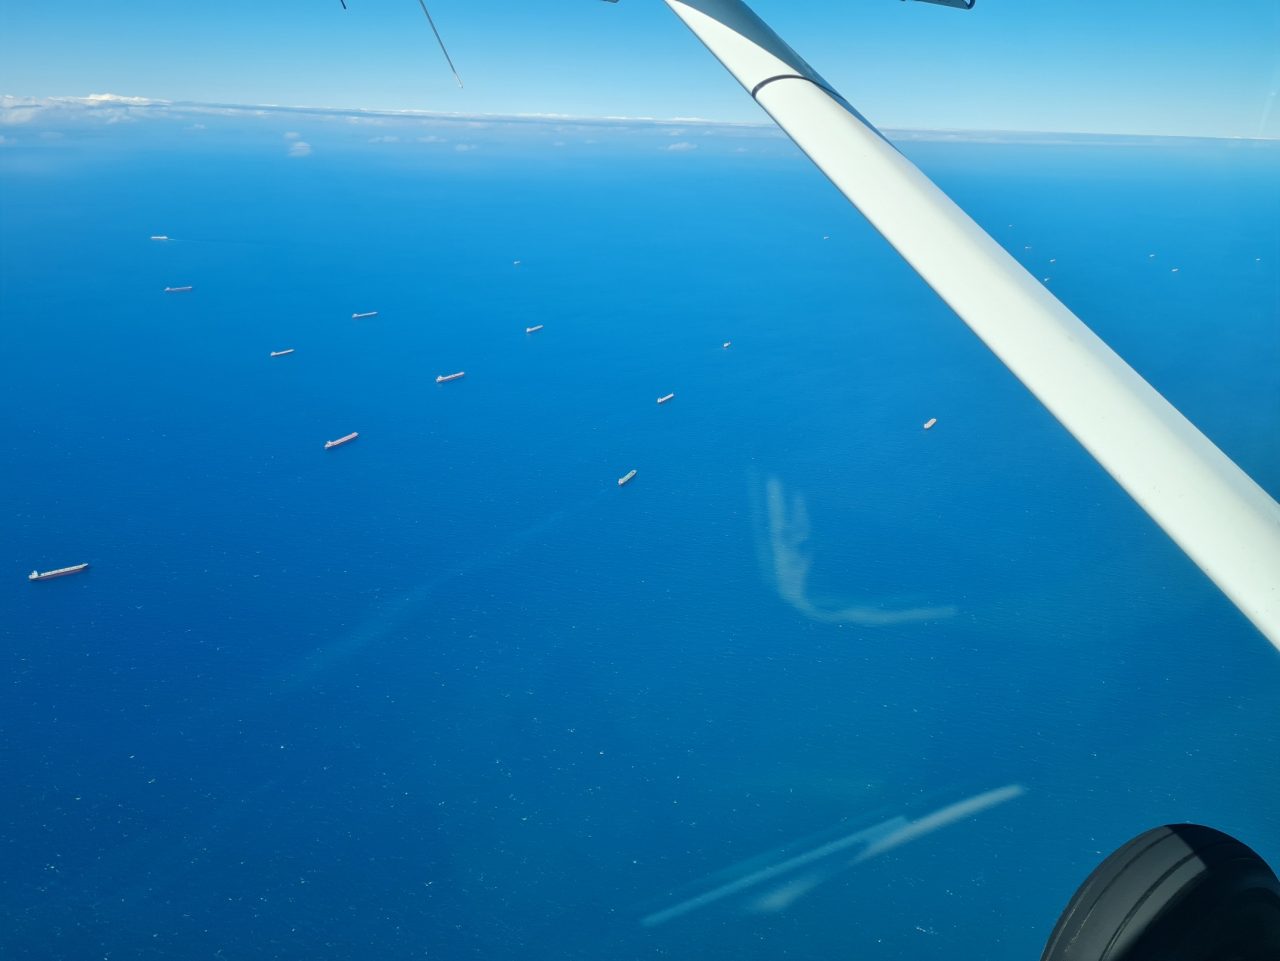 Aerial photo over ocean of over 20 coal and gas ships sailing in lines. Aircraft wing  strut and wheel also in image